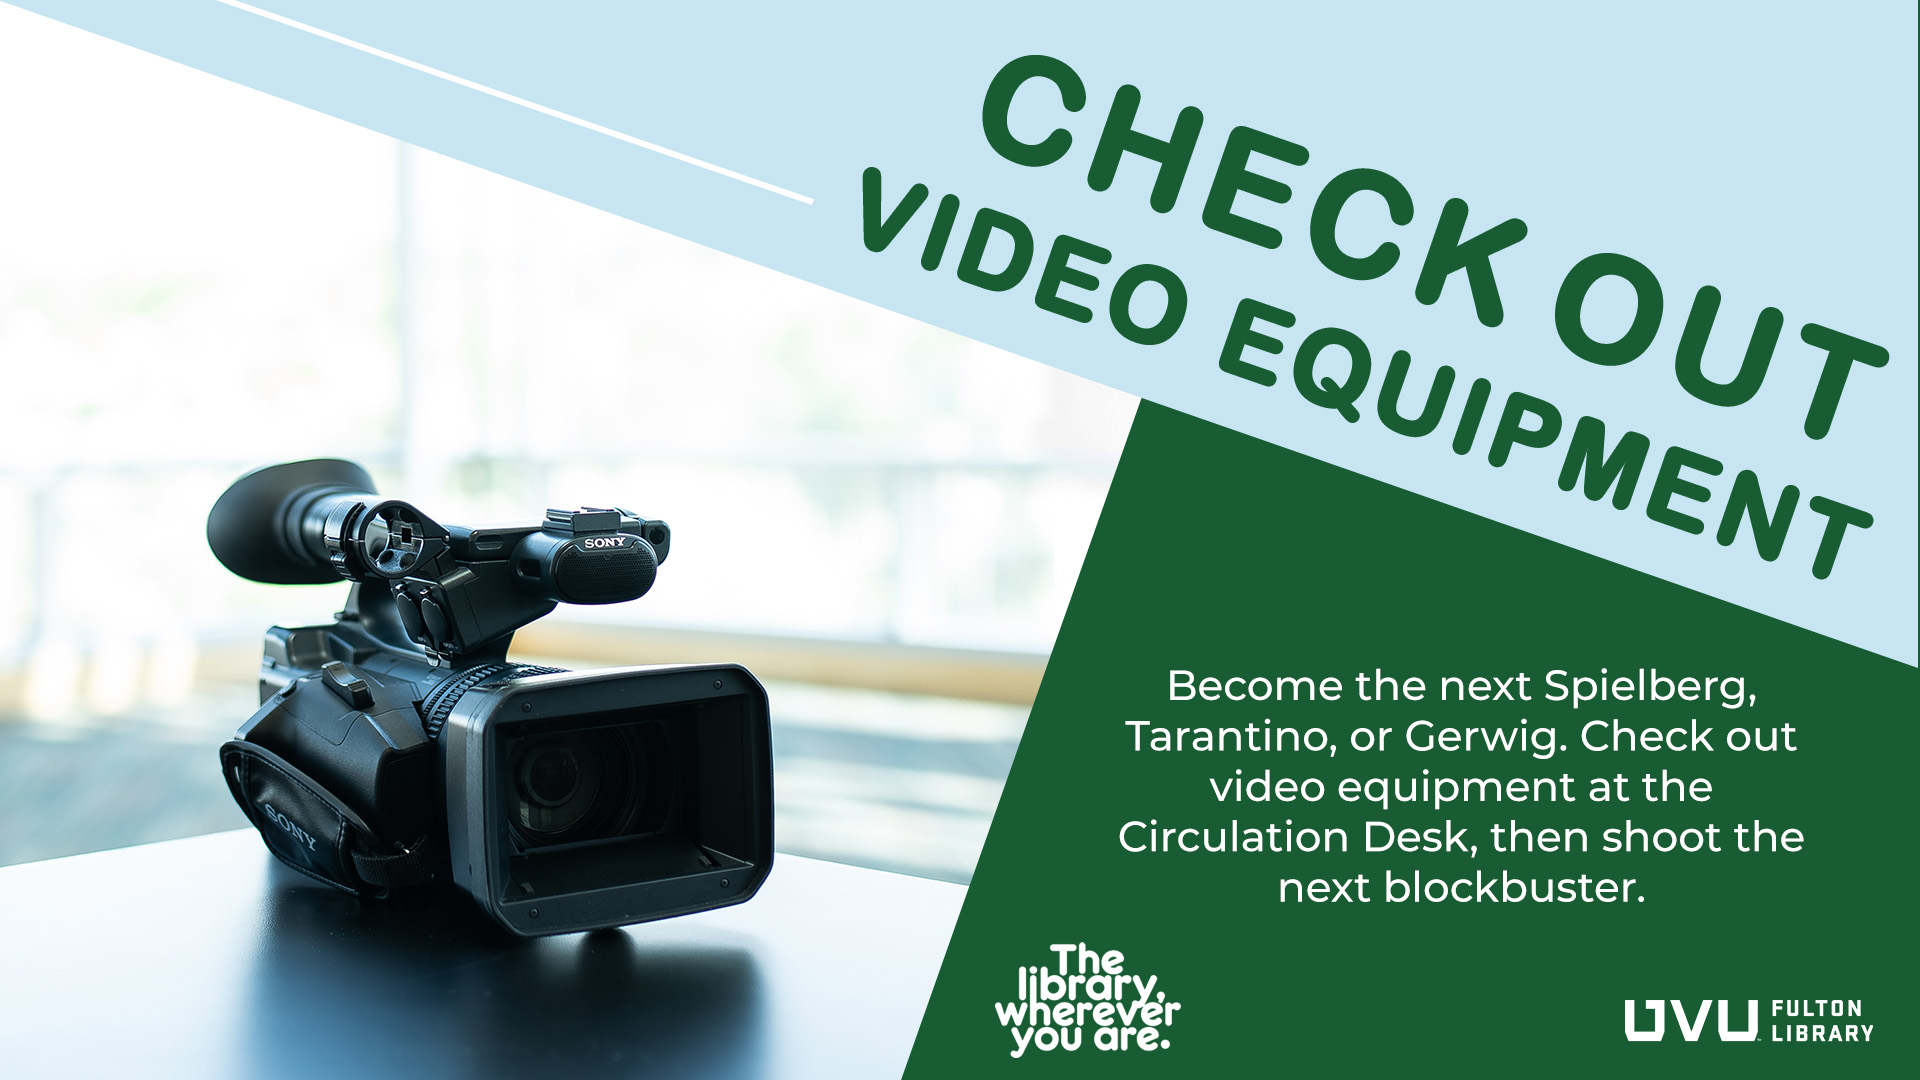 Checkout Video Equipment. Become the next Speilberg, Tarantino, or Gerwig. Check out video equipment at the Circulation Desk, then shoot the next blockbuster.